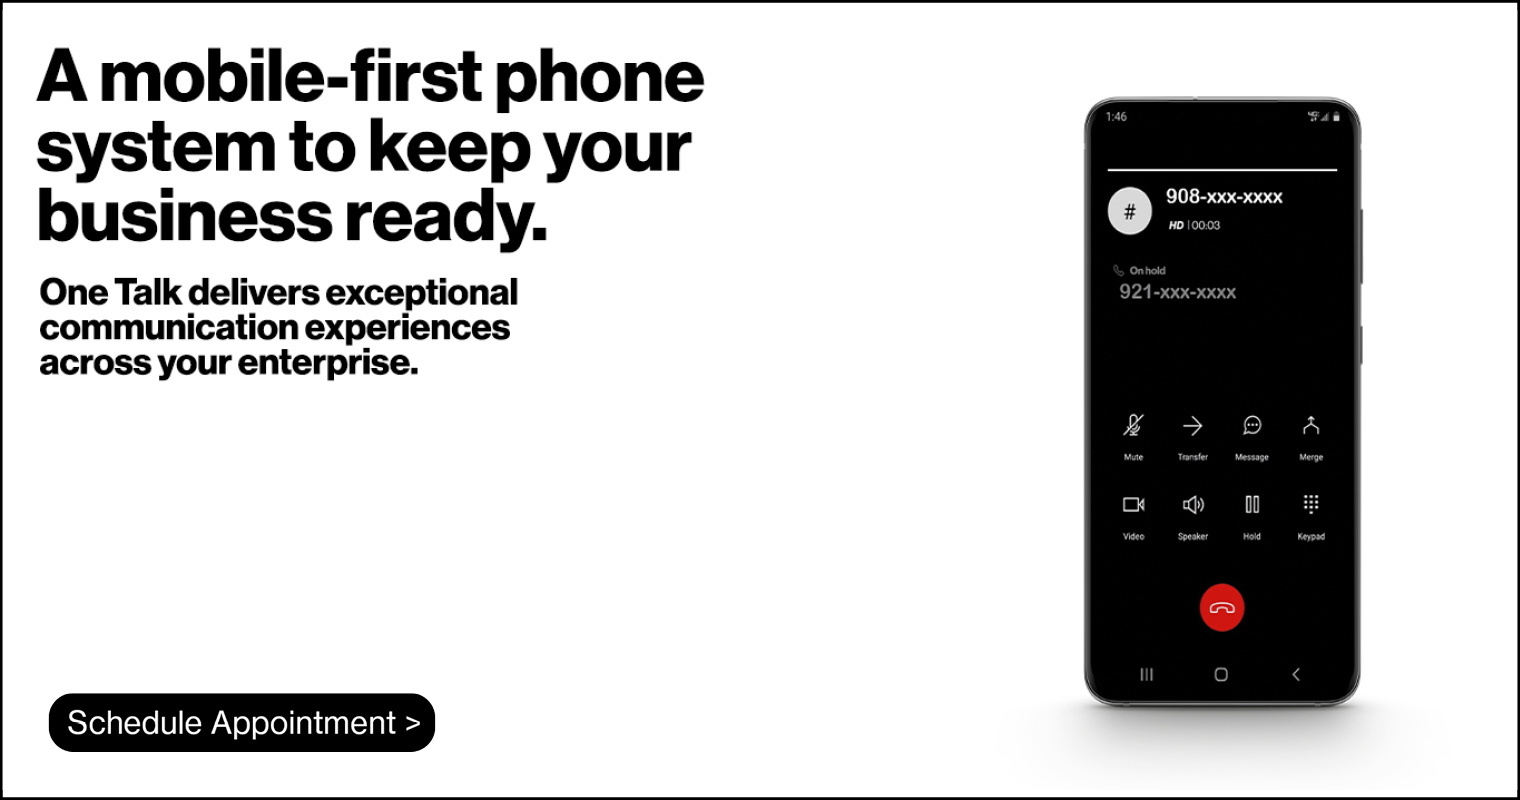 Introducing One Talk. A mobile-first system to keep your business ready.